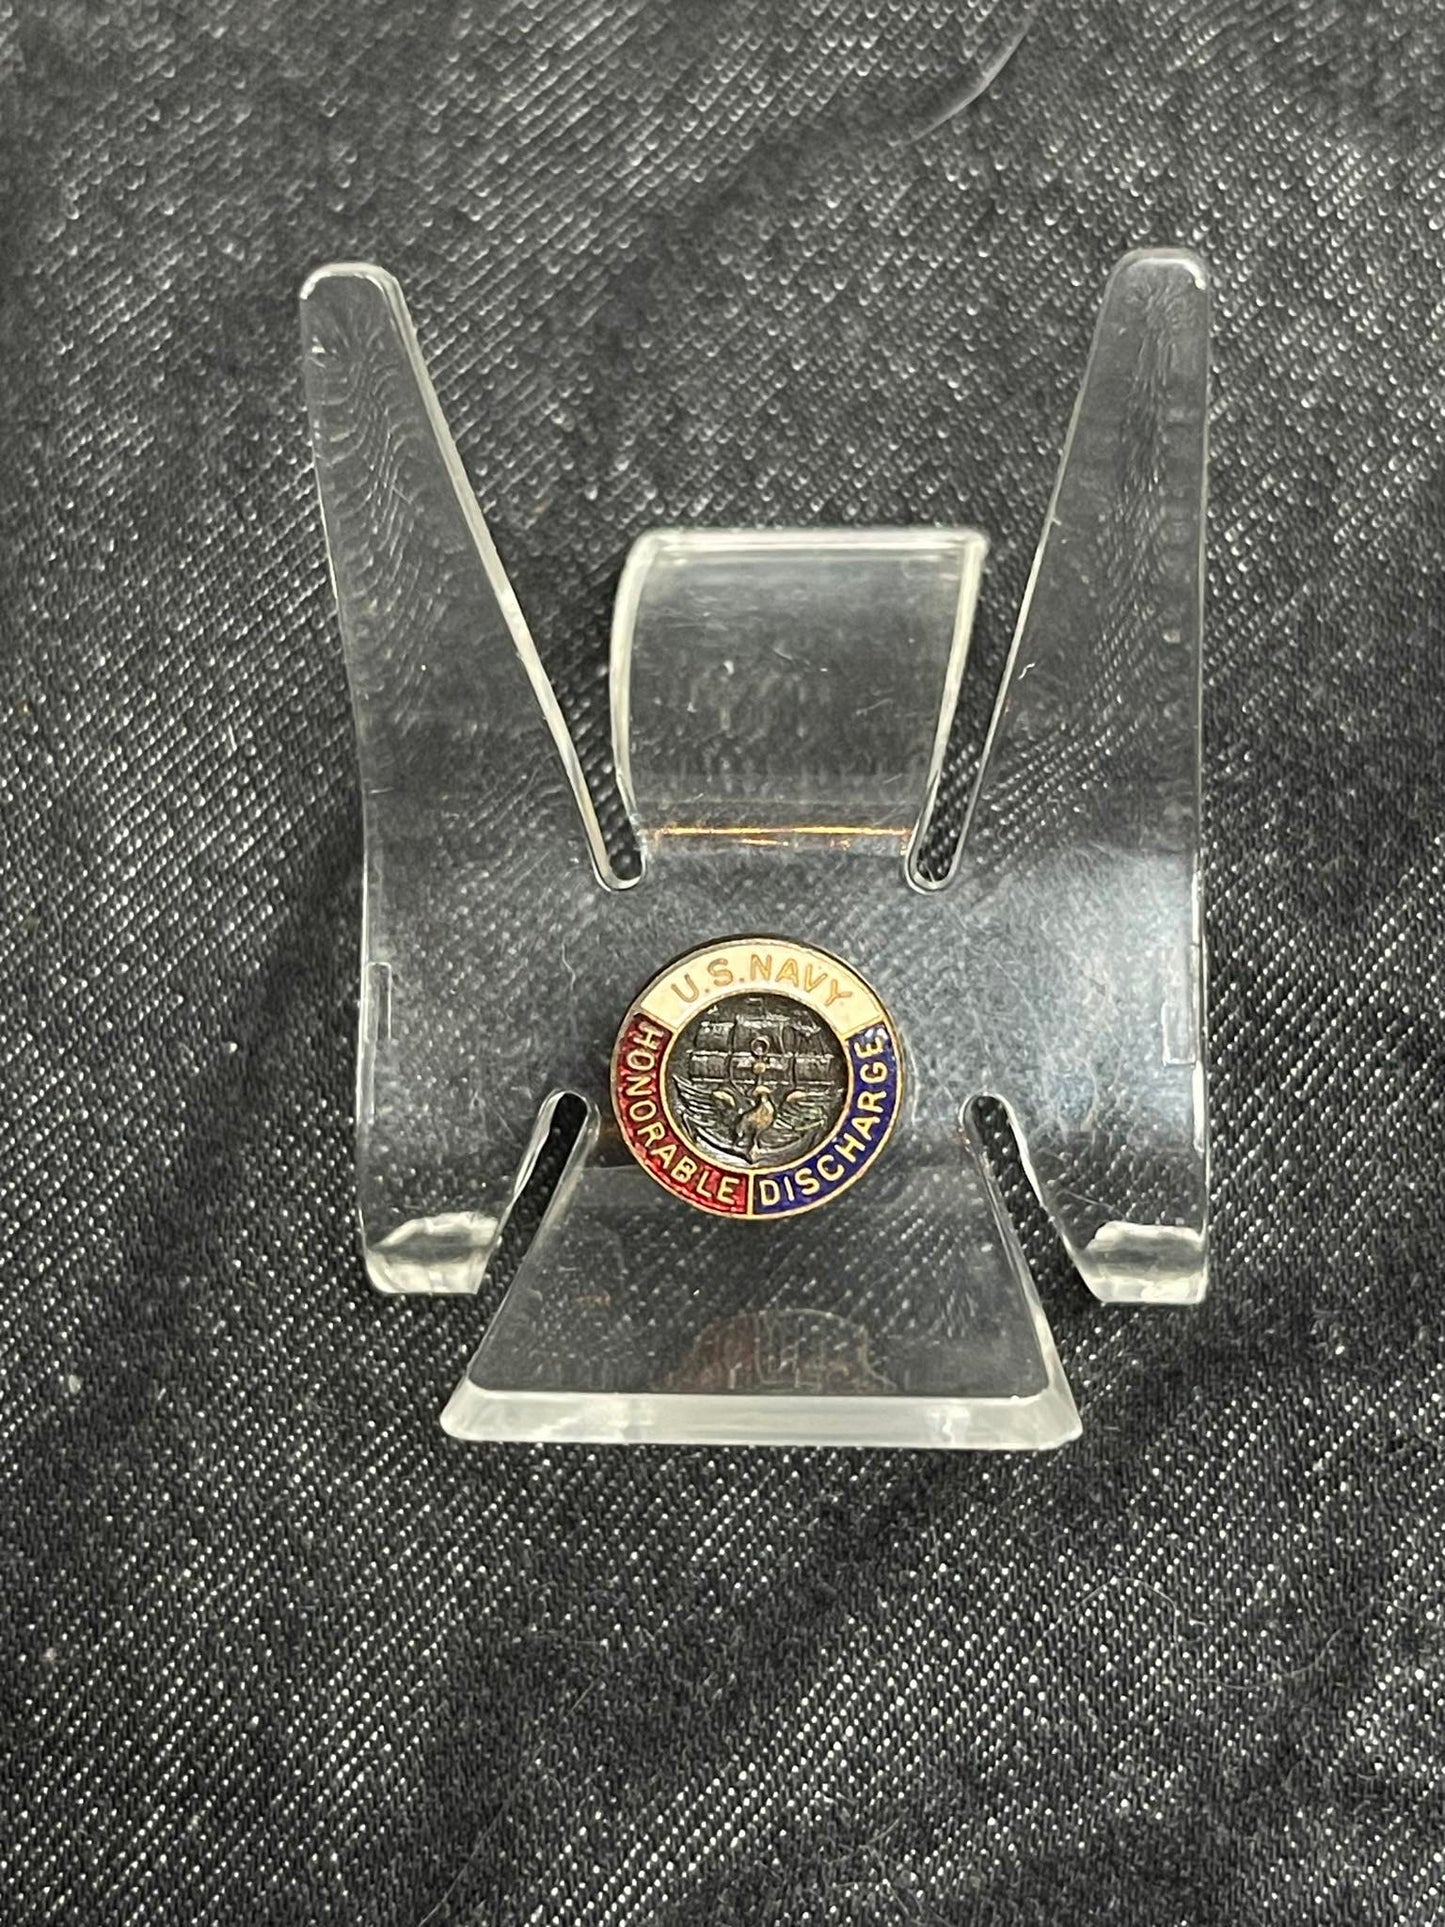 US NAVY HONORABLE DISCHARGE LAPEL PIN EARLY VARIANT